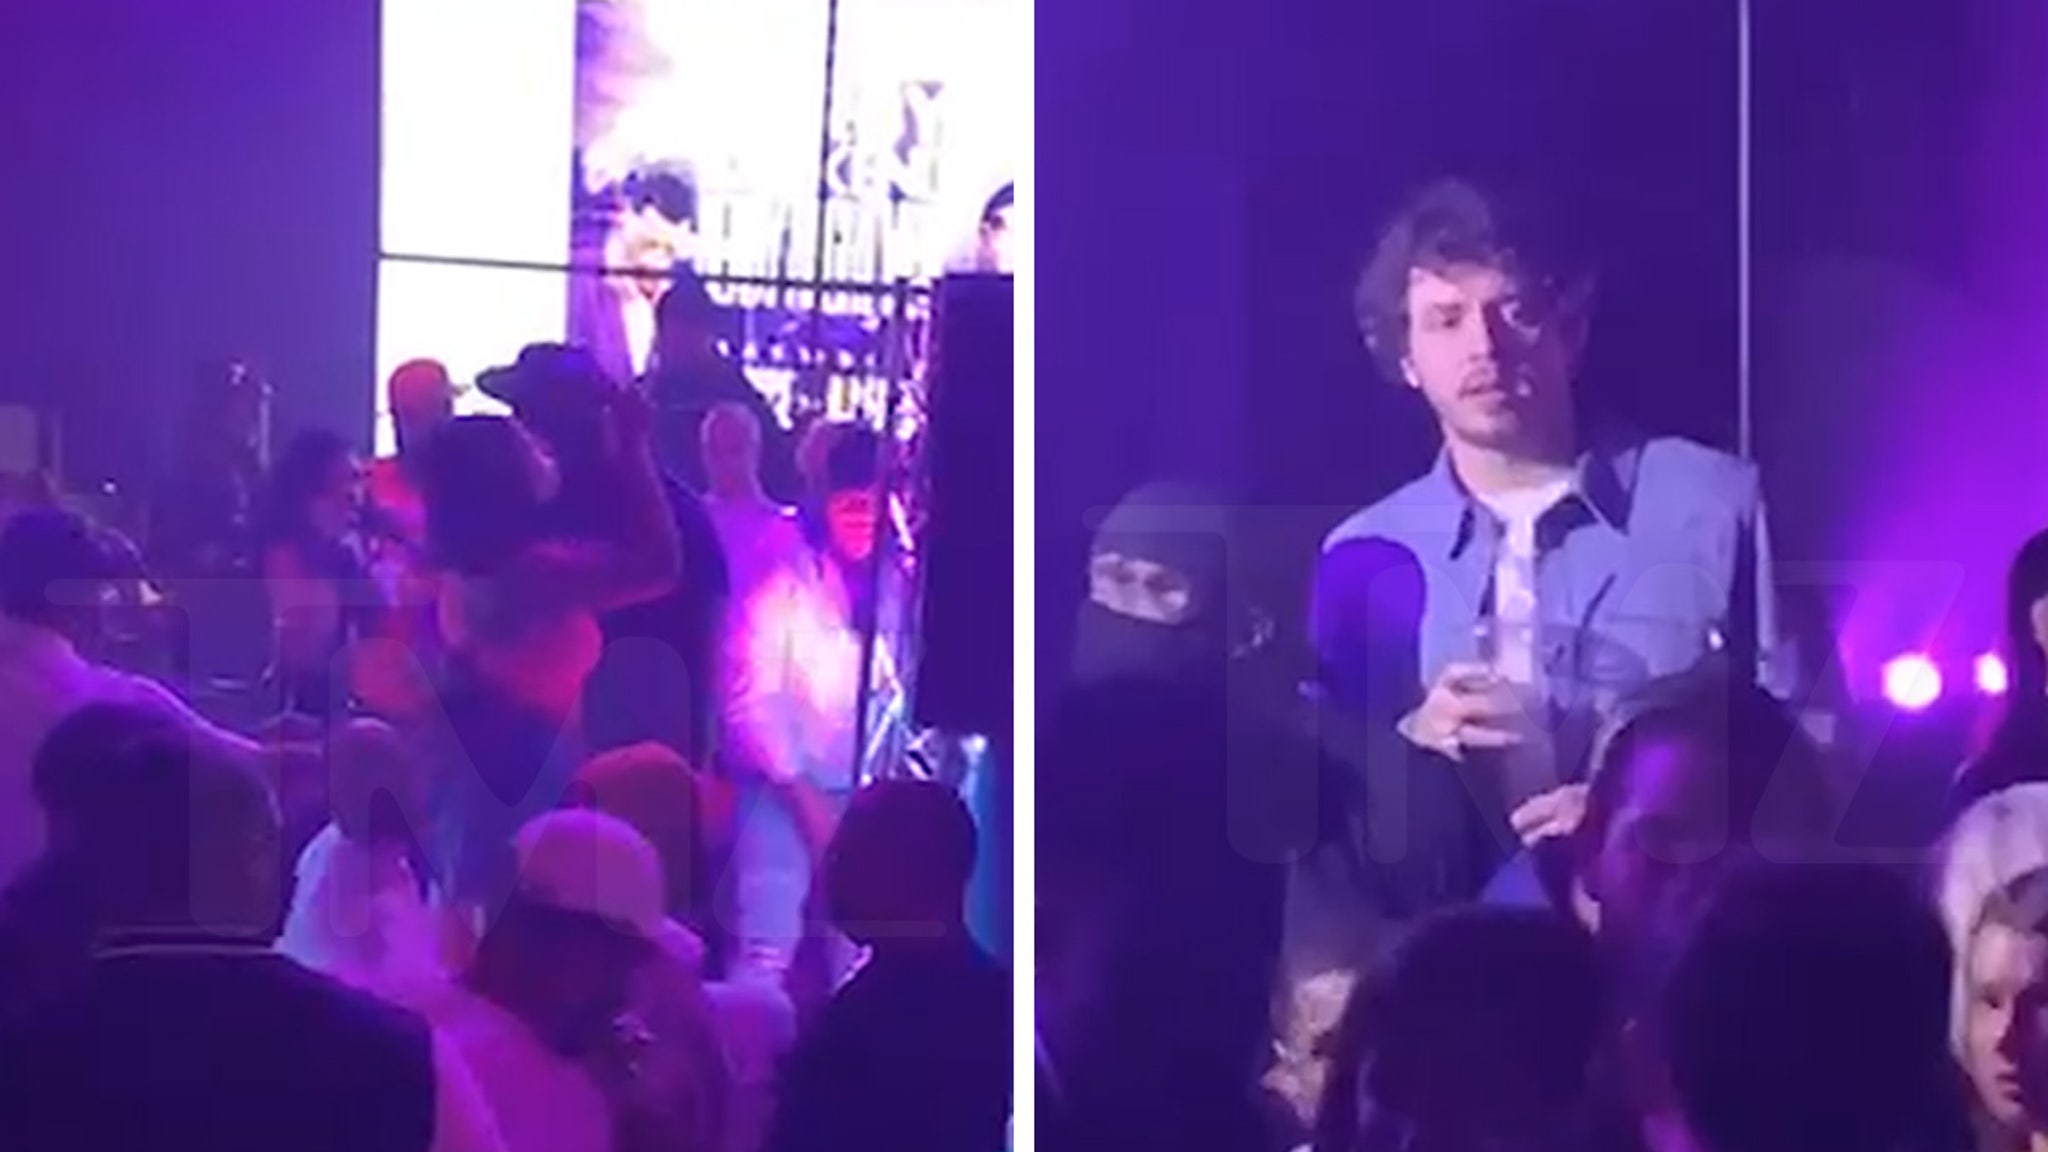 Jack Harlow Caught in the Middle of Deadly Louisville Nightclub Shooting